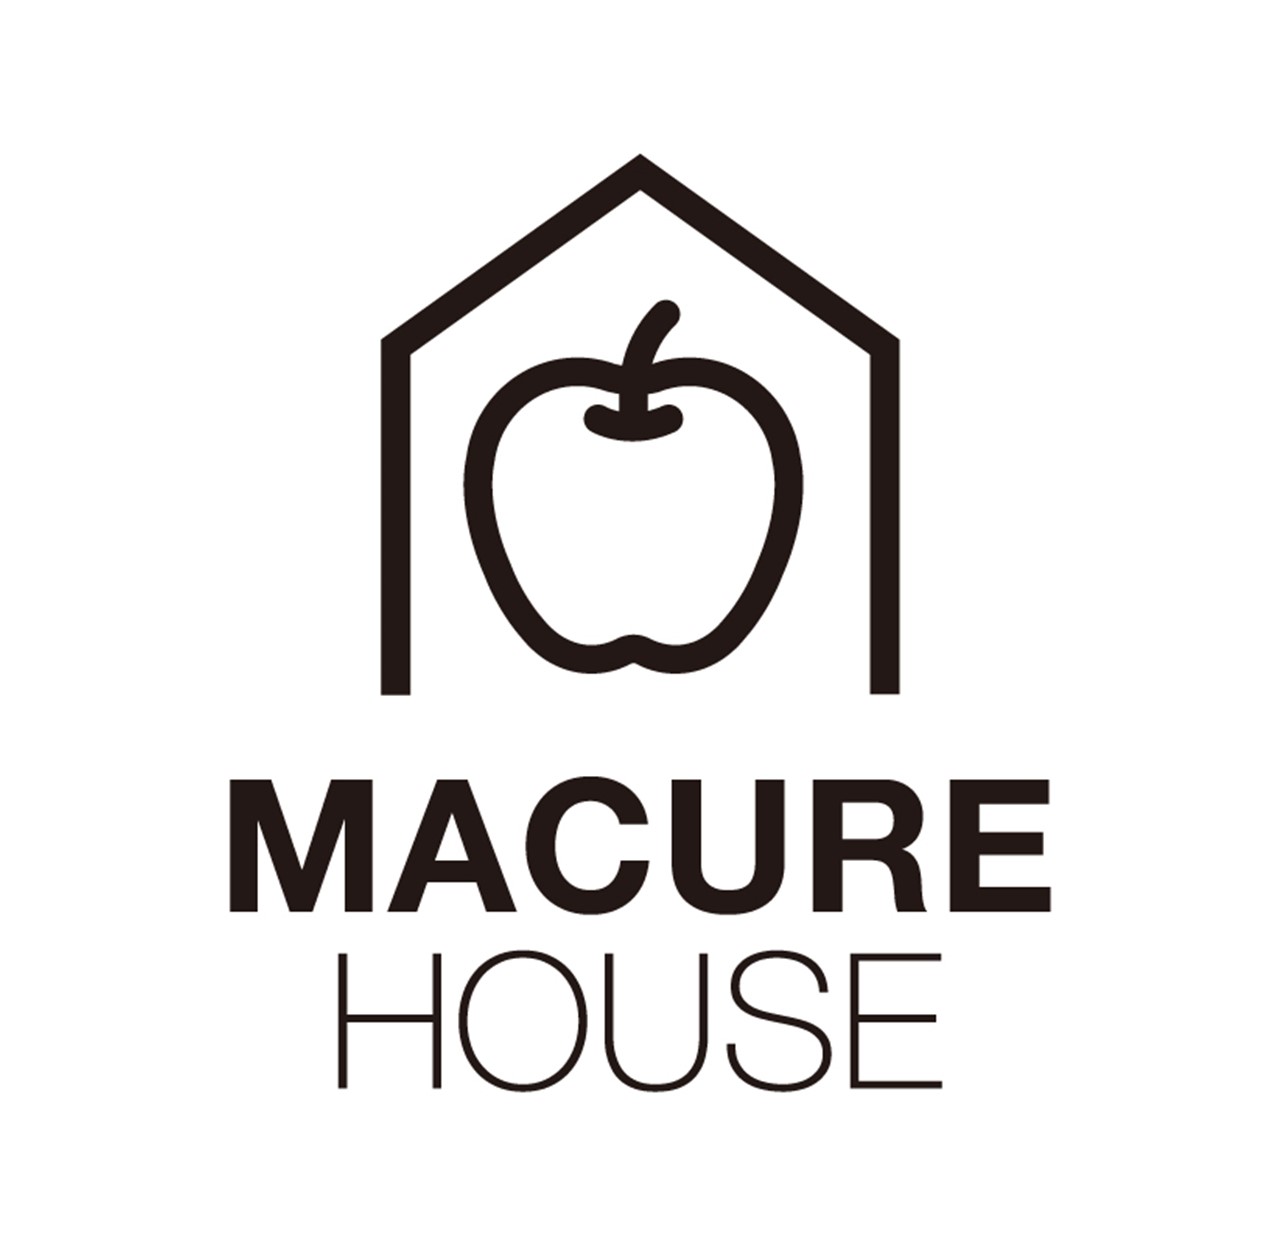 03 MACURE HOUSE